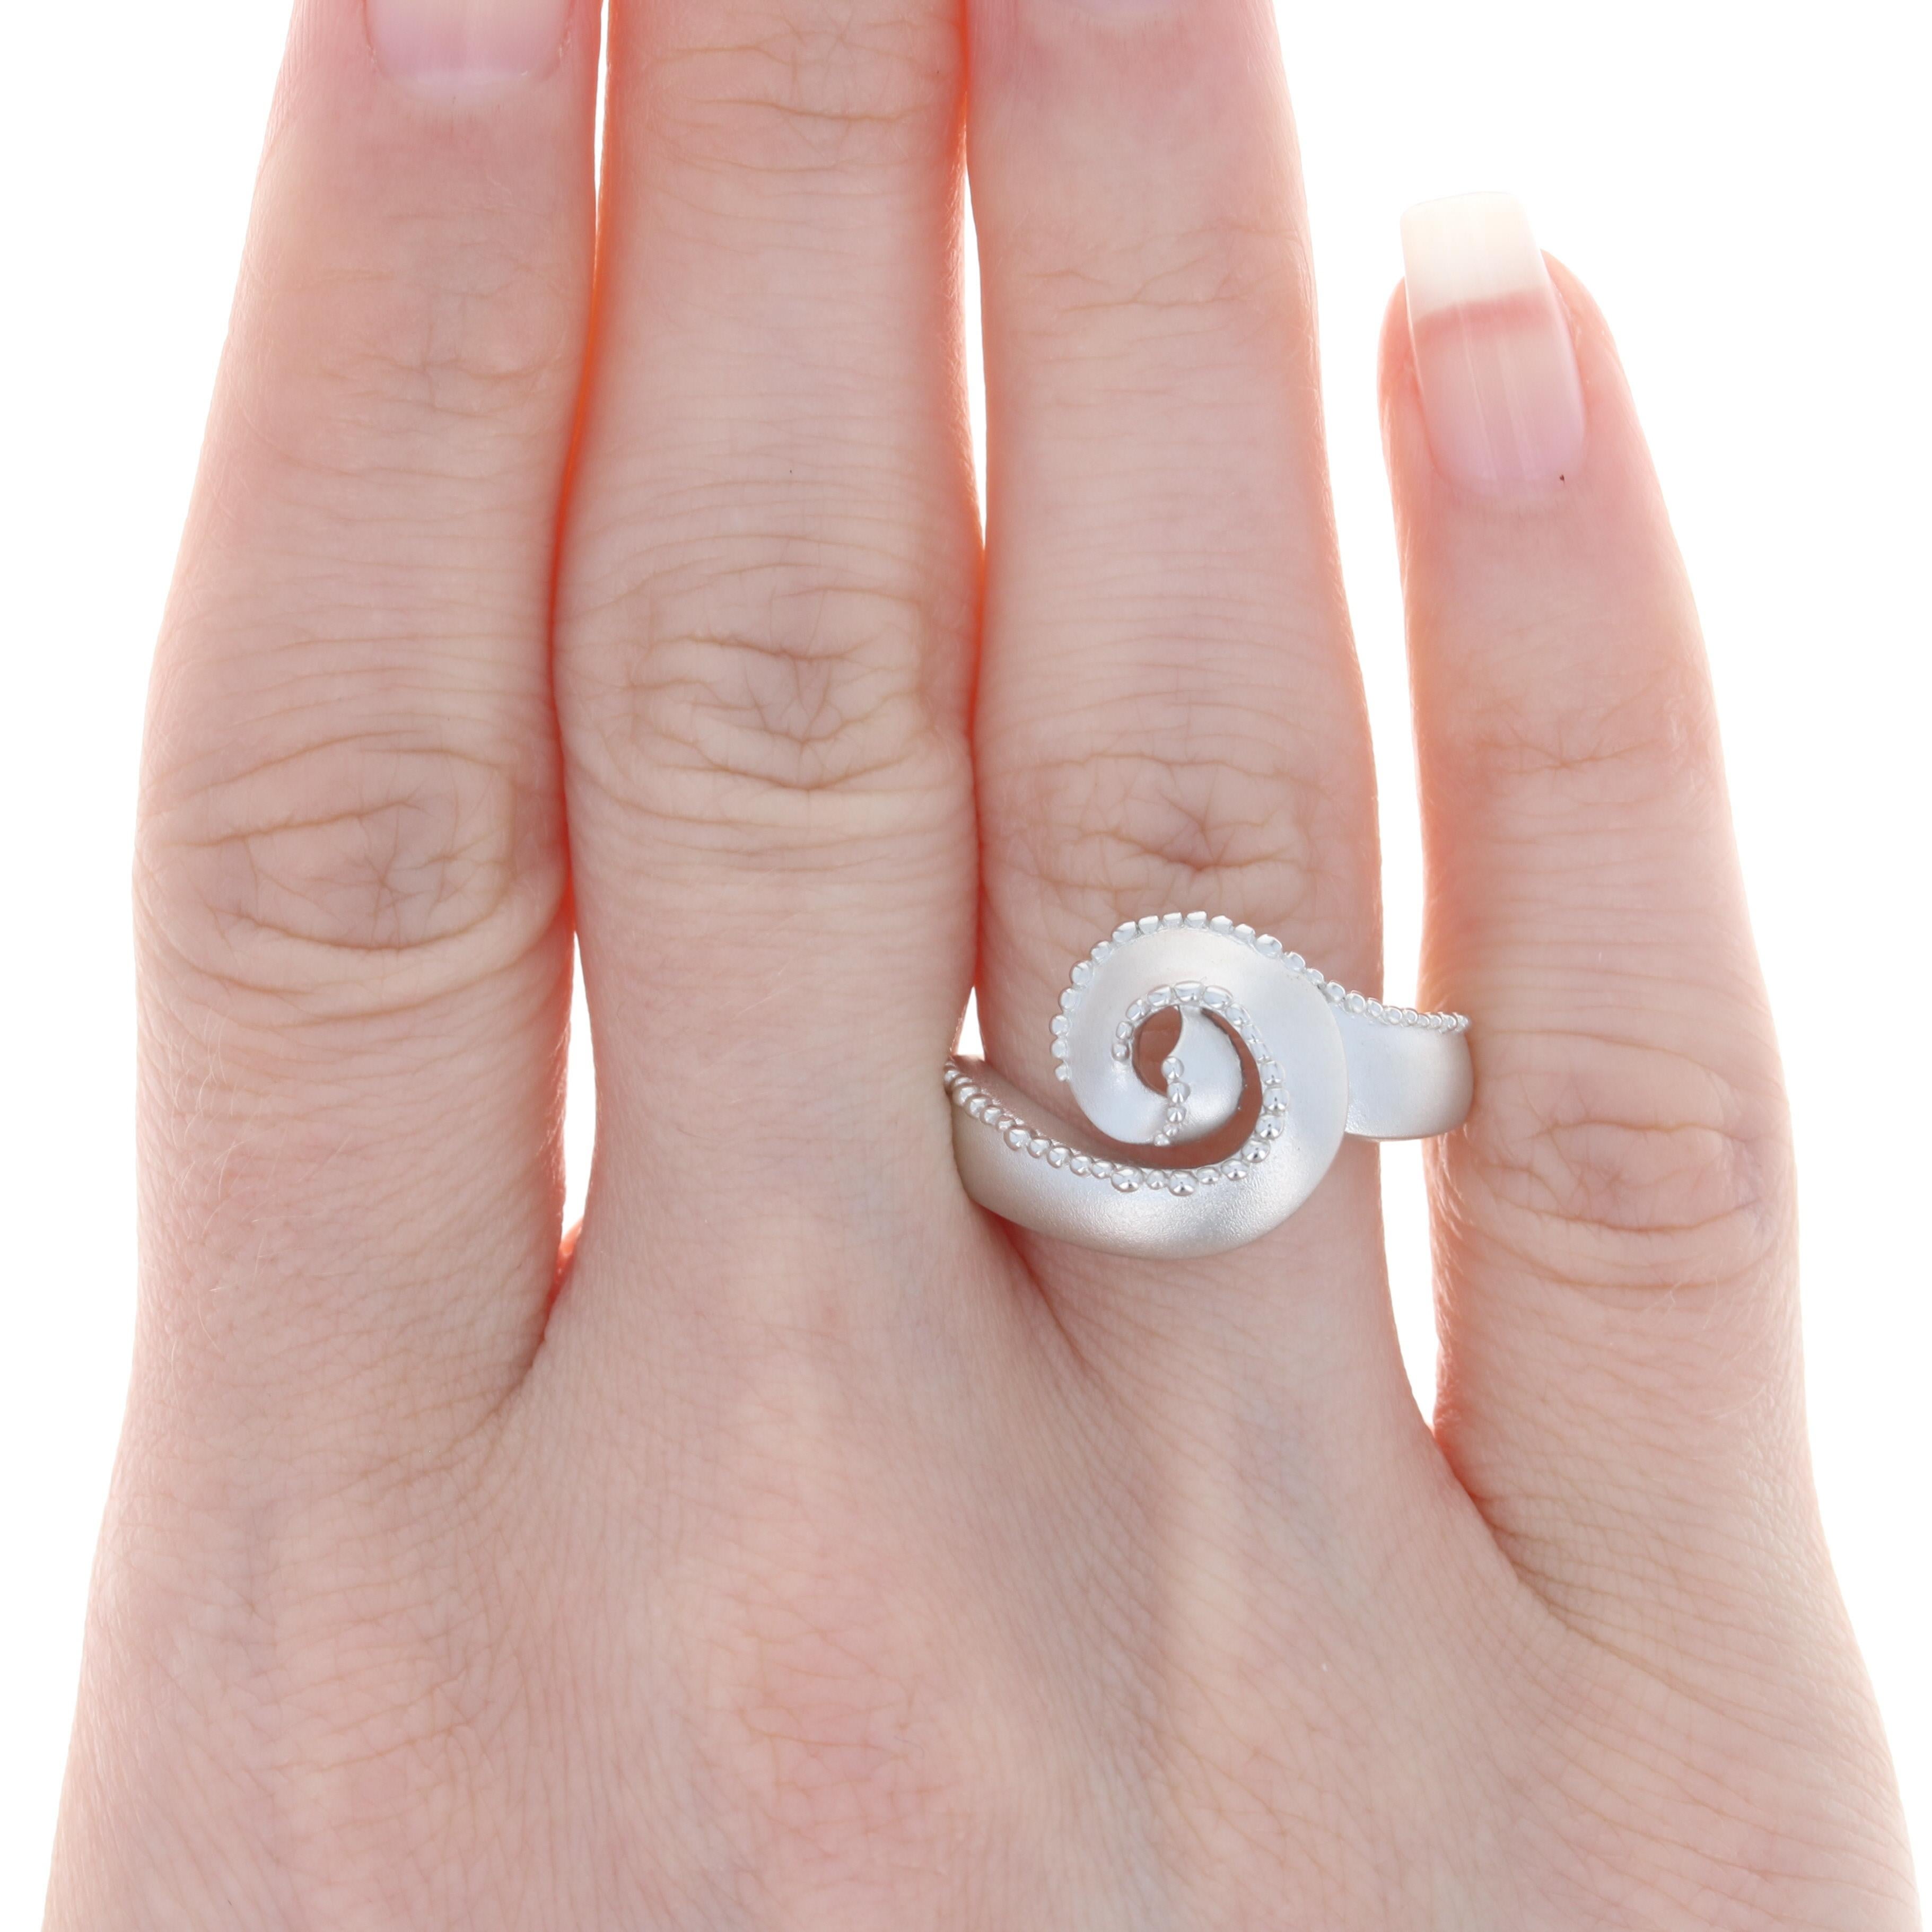 New Bastian Inverun Swirl Ring, Brushed Sterling Silver Statement In New Condition For Sale In Greensboro, NC